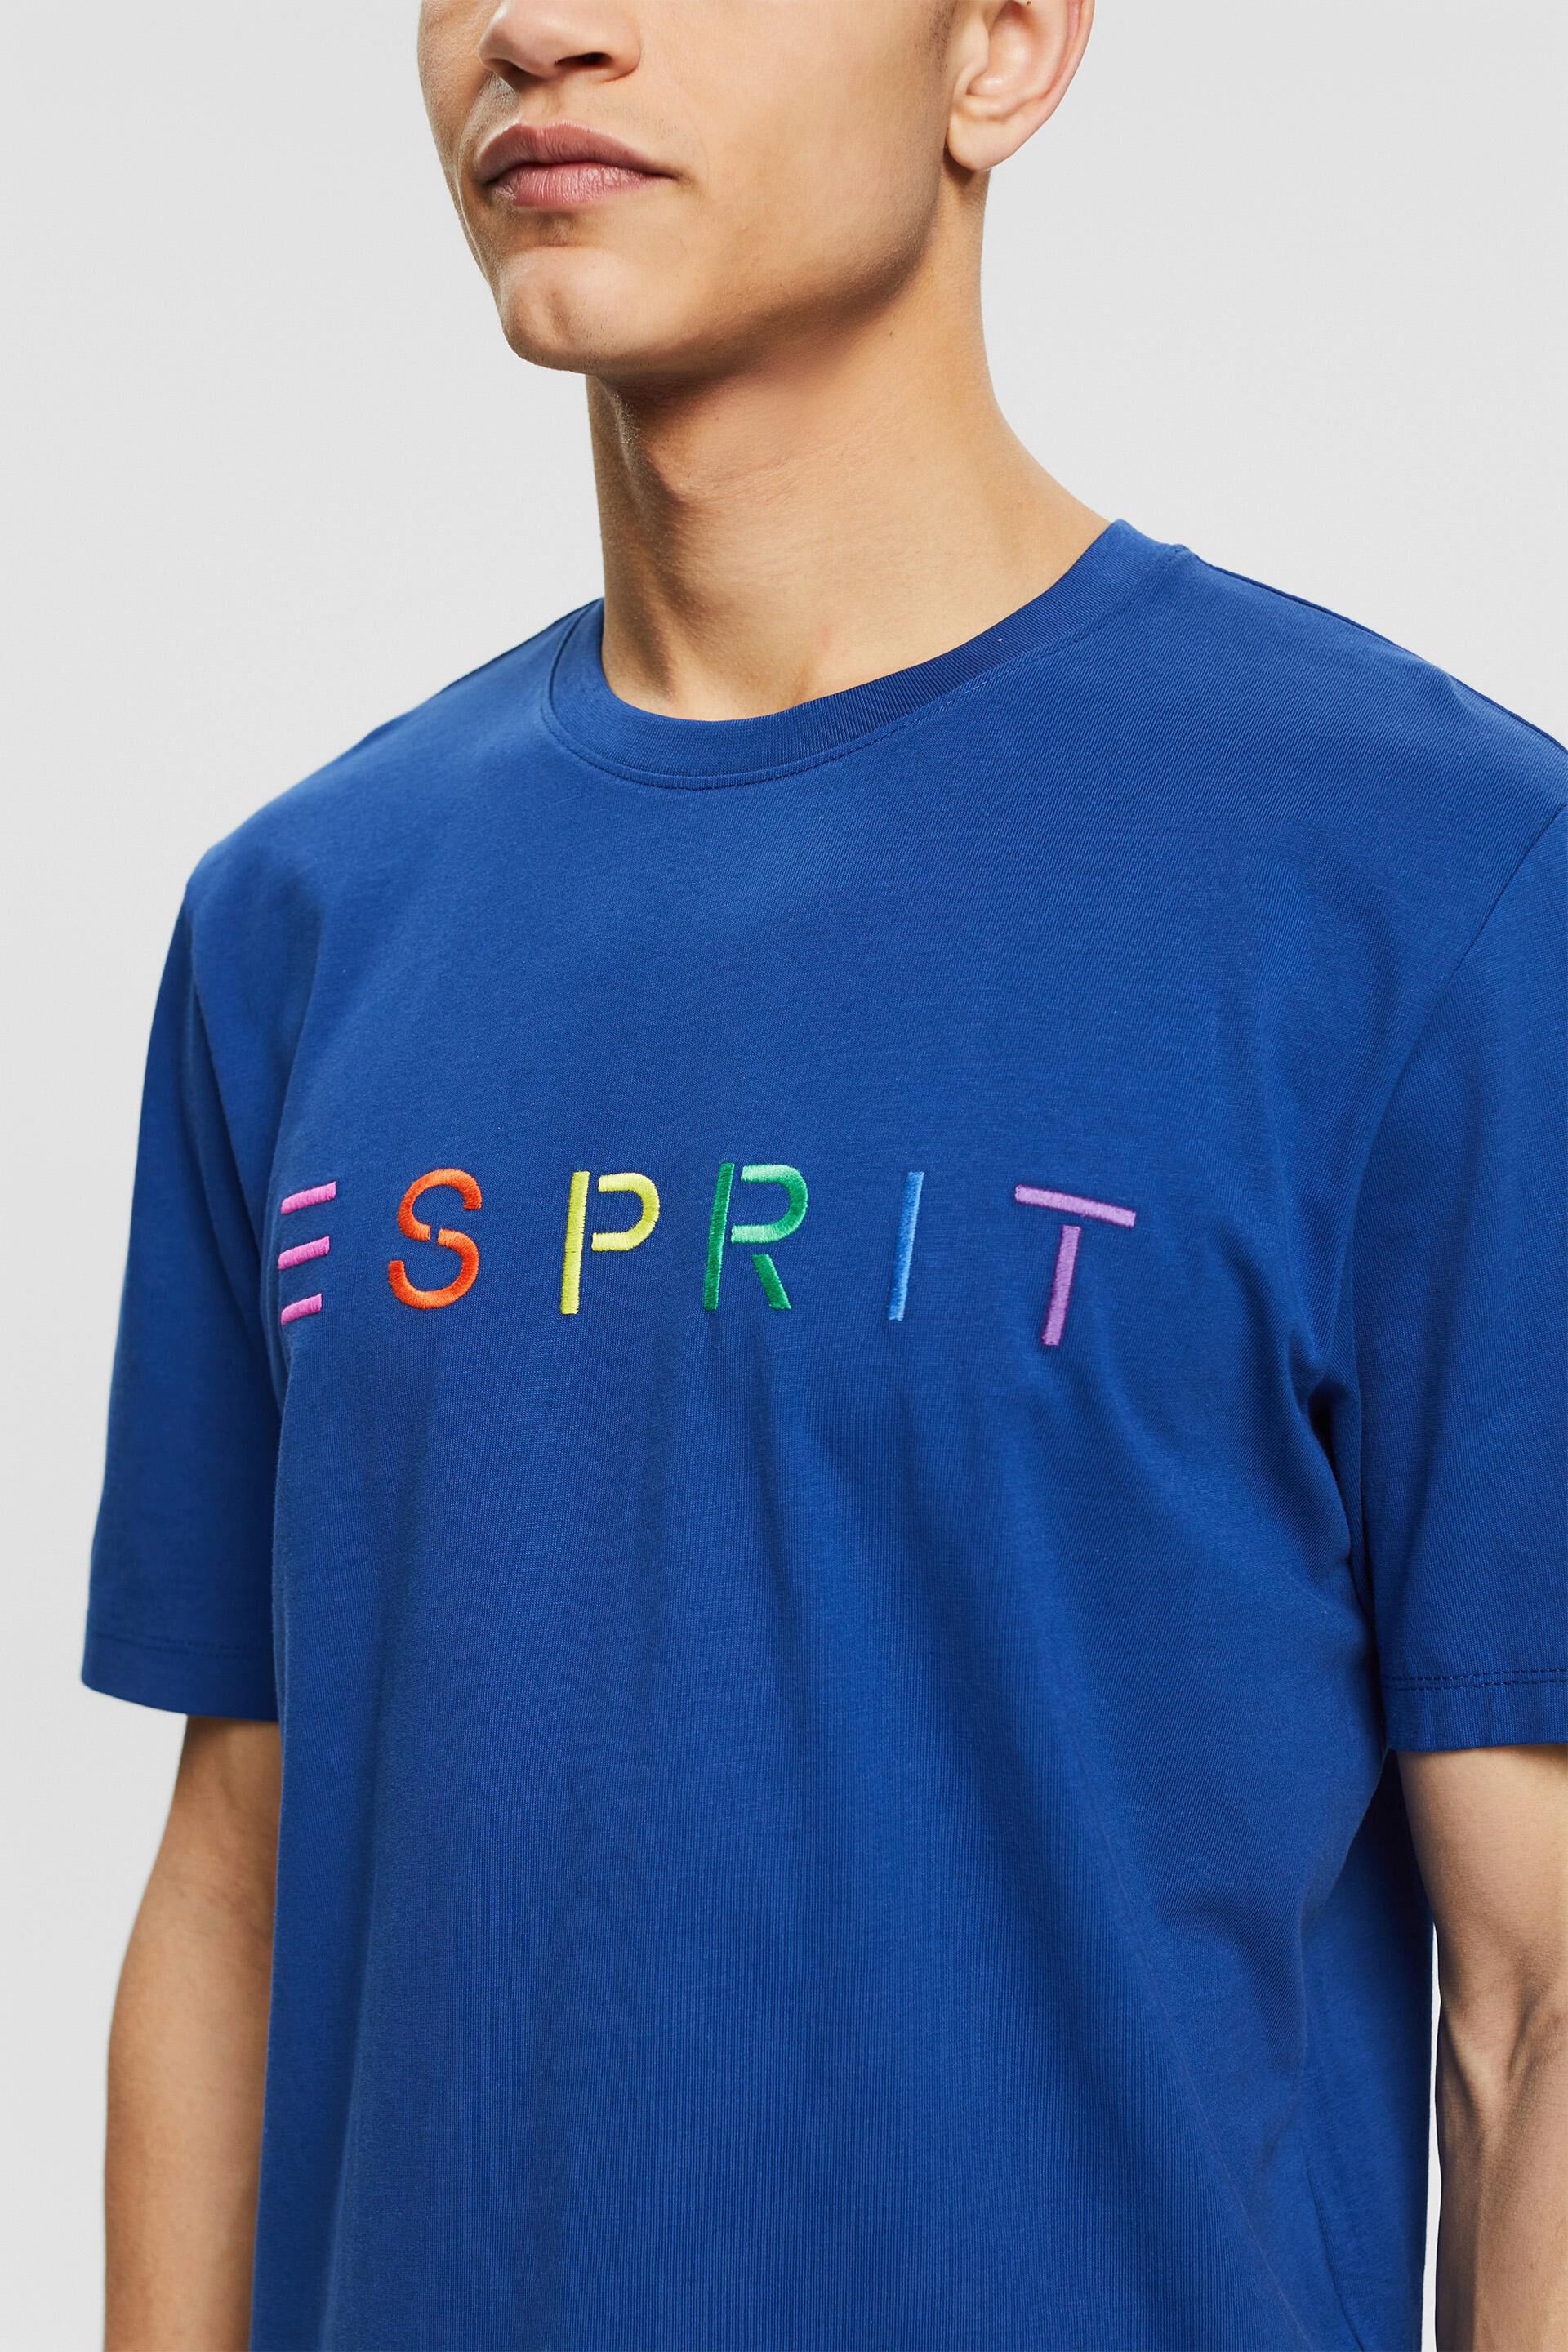 Esprit logo t-shirt embroidered with Jersey